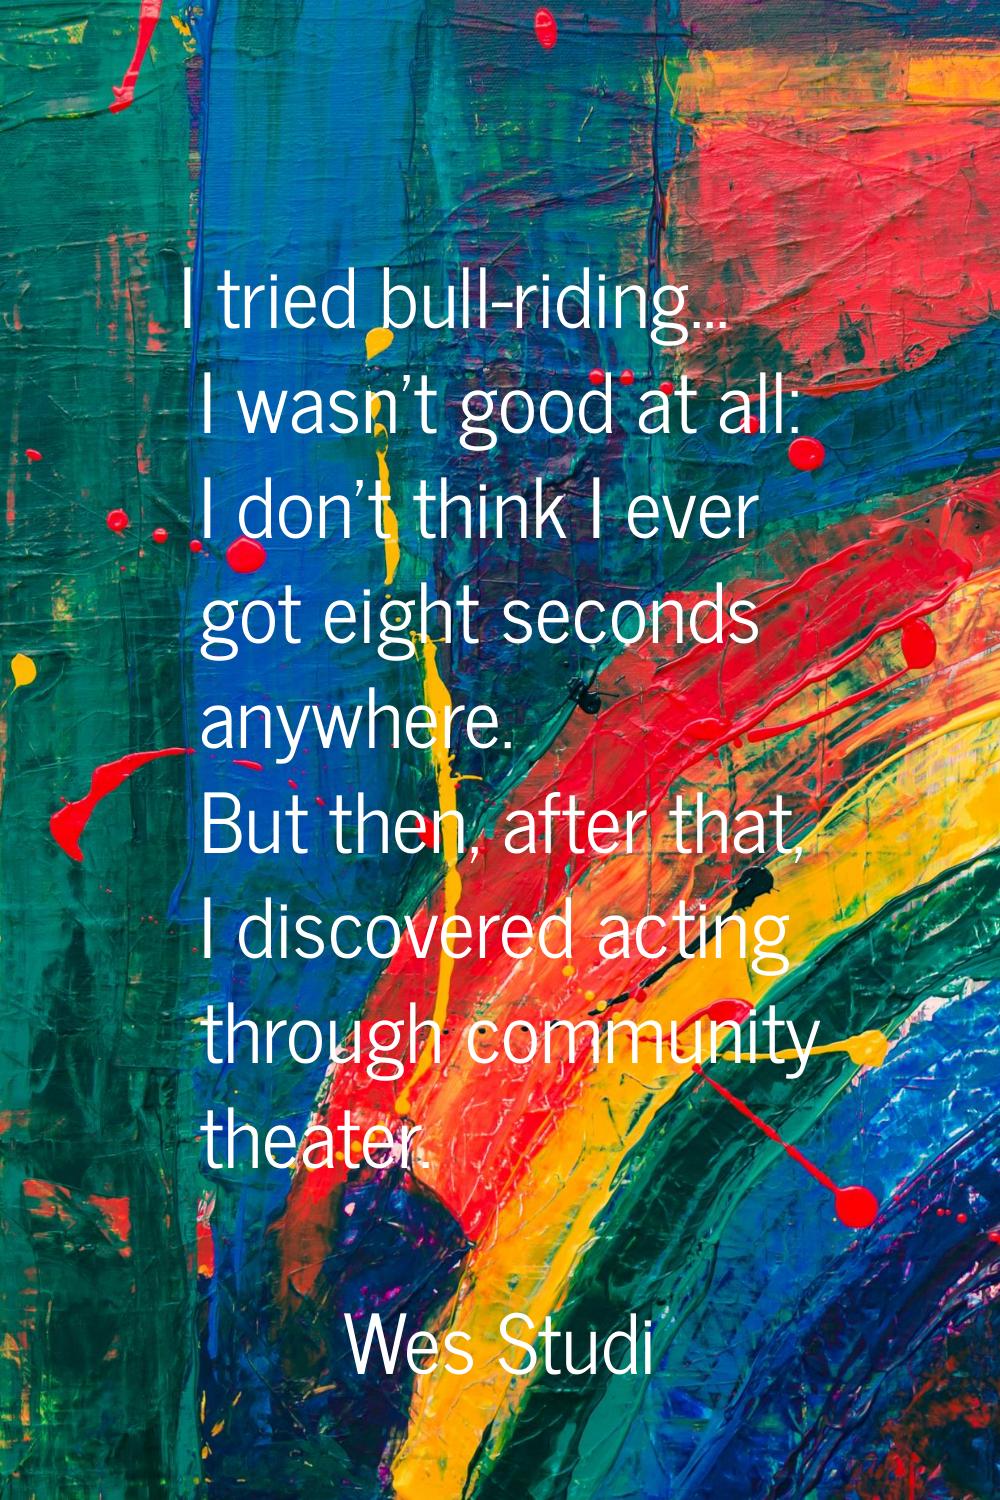 I tried bull-riding... I wasn't good at all: I don't think I ever got eight seconds anywhere. But t